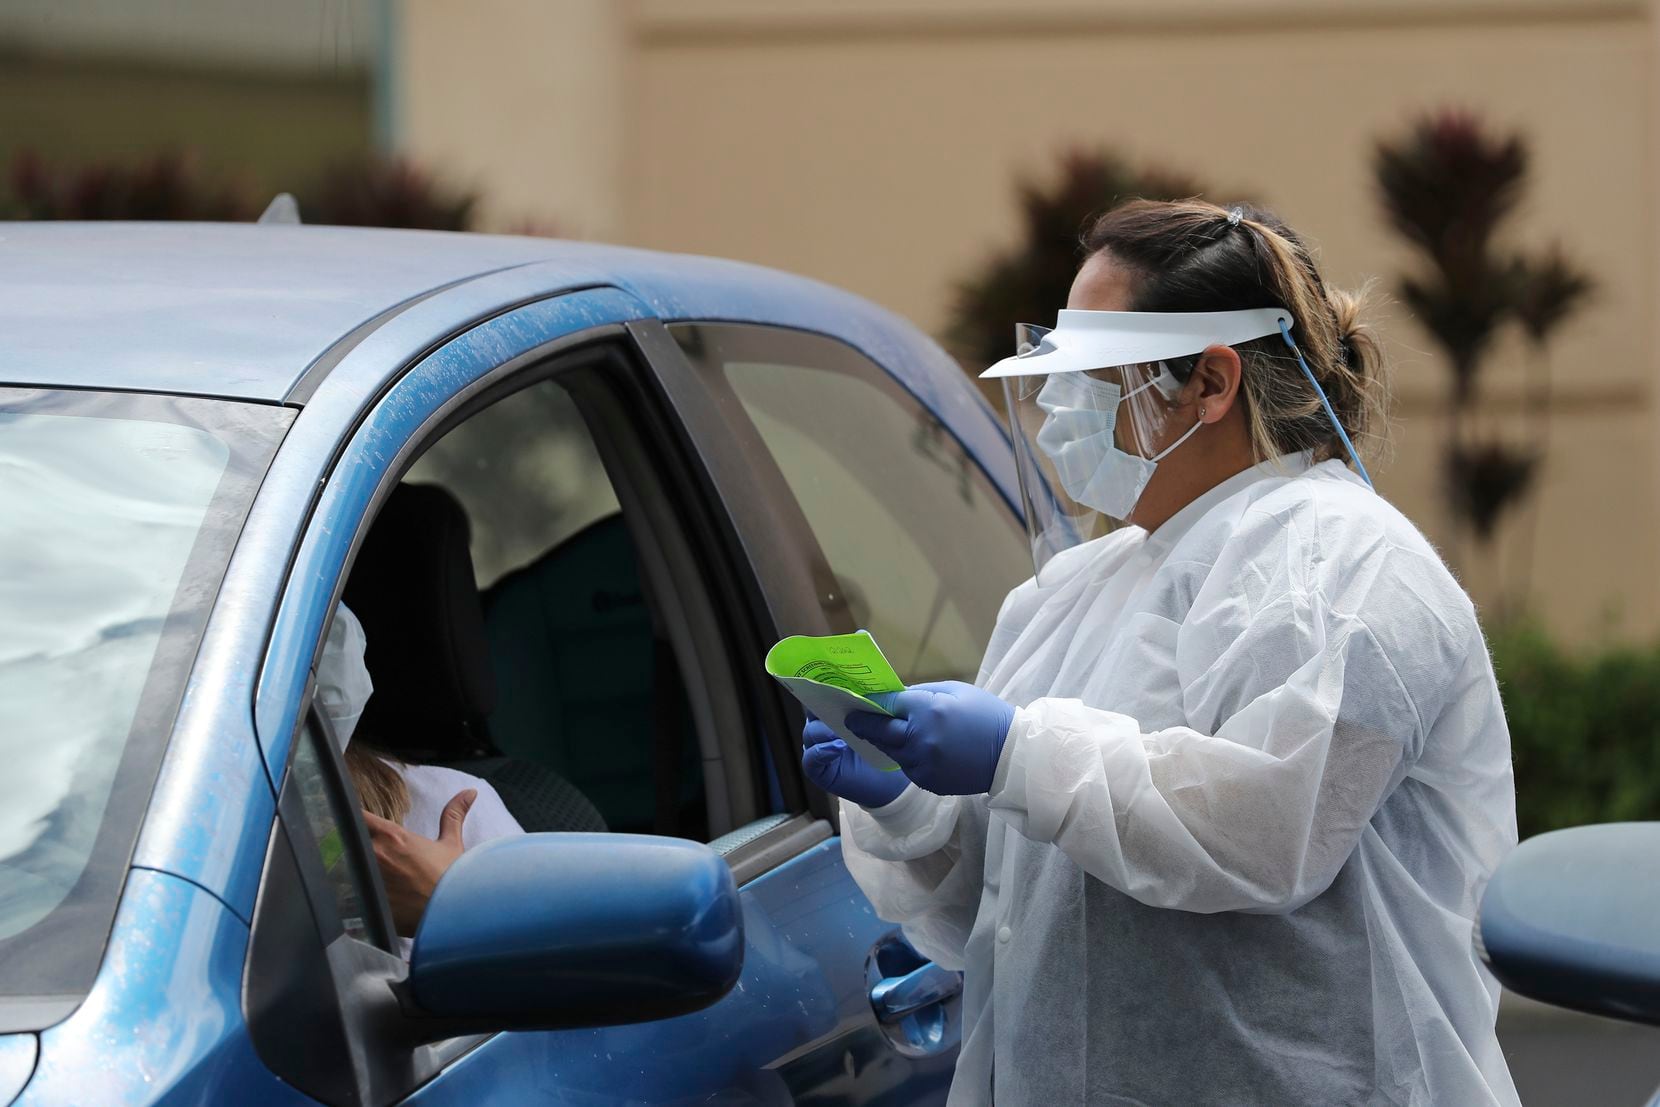 A medical worker at a facility in Pearl City, Hawaii, fully equipped with eye and body protection to test patients in their vehicles. (AP Photo/Marco Garcia)